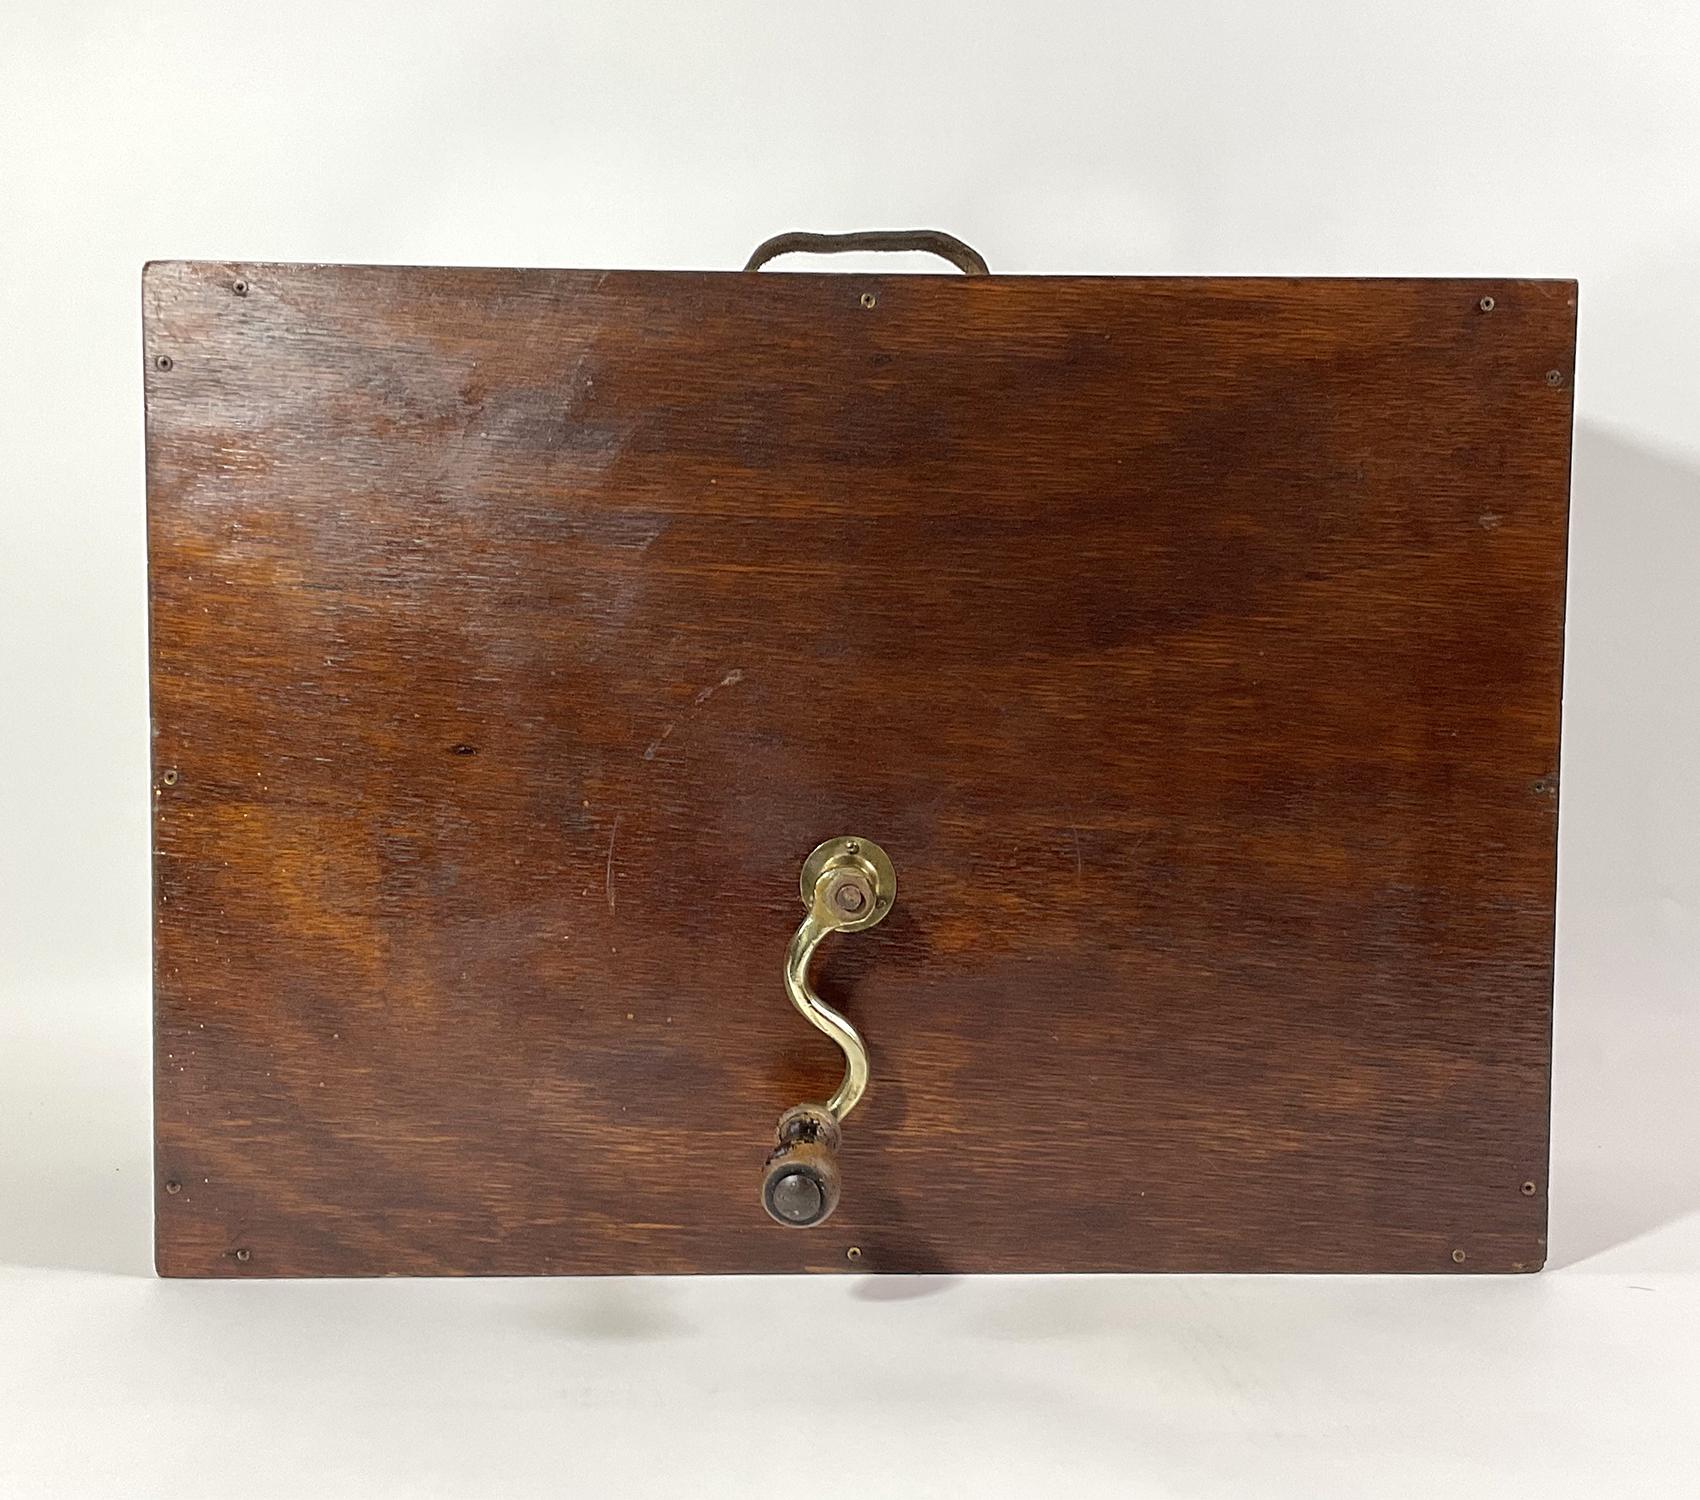 Ships foghorn with mahogany box with brass crank handle. Leather carry handle. Circa 1950.